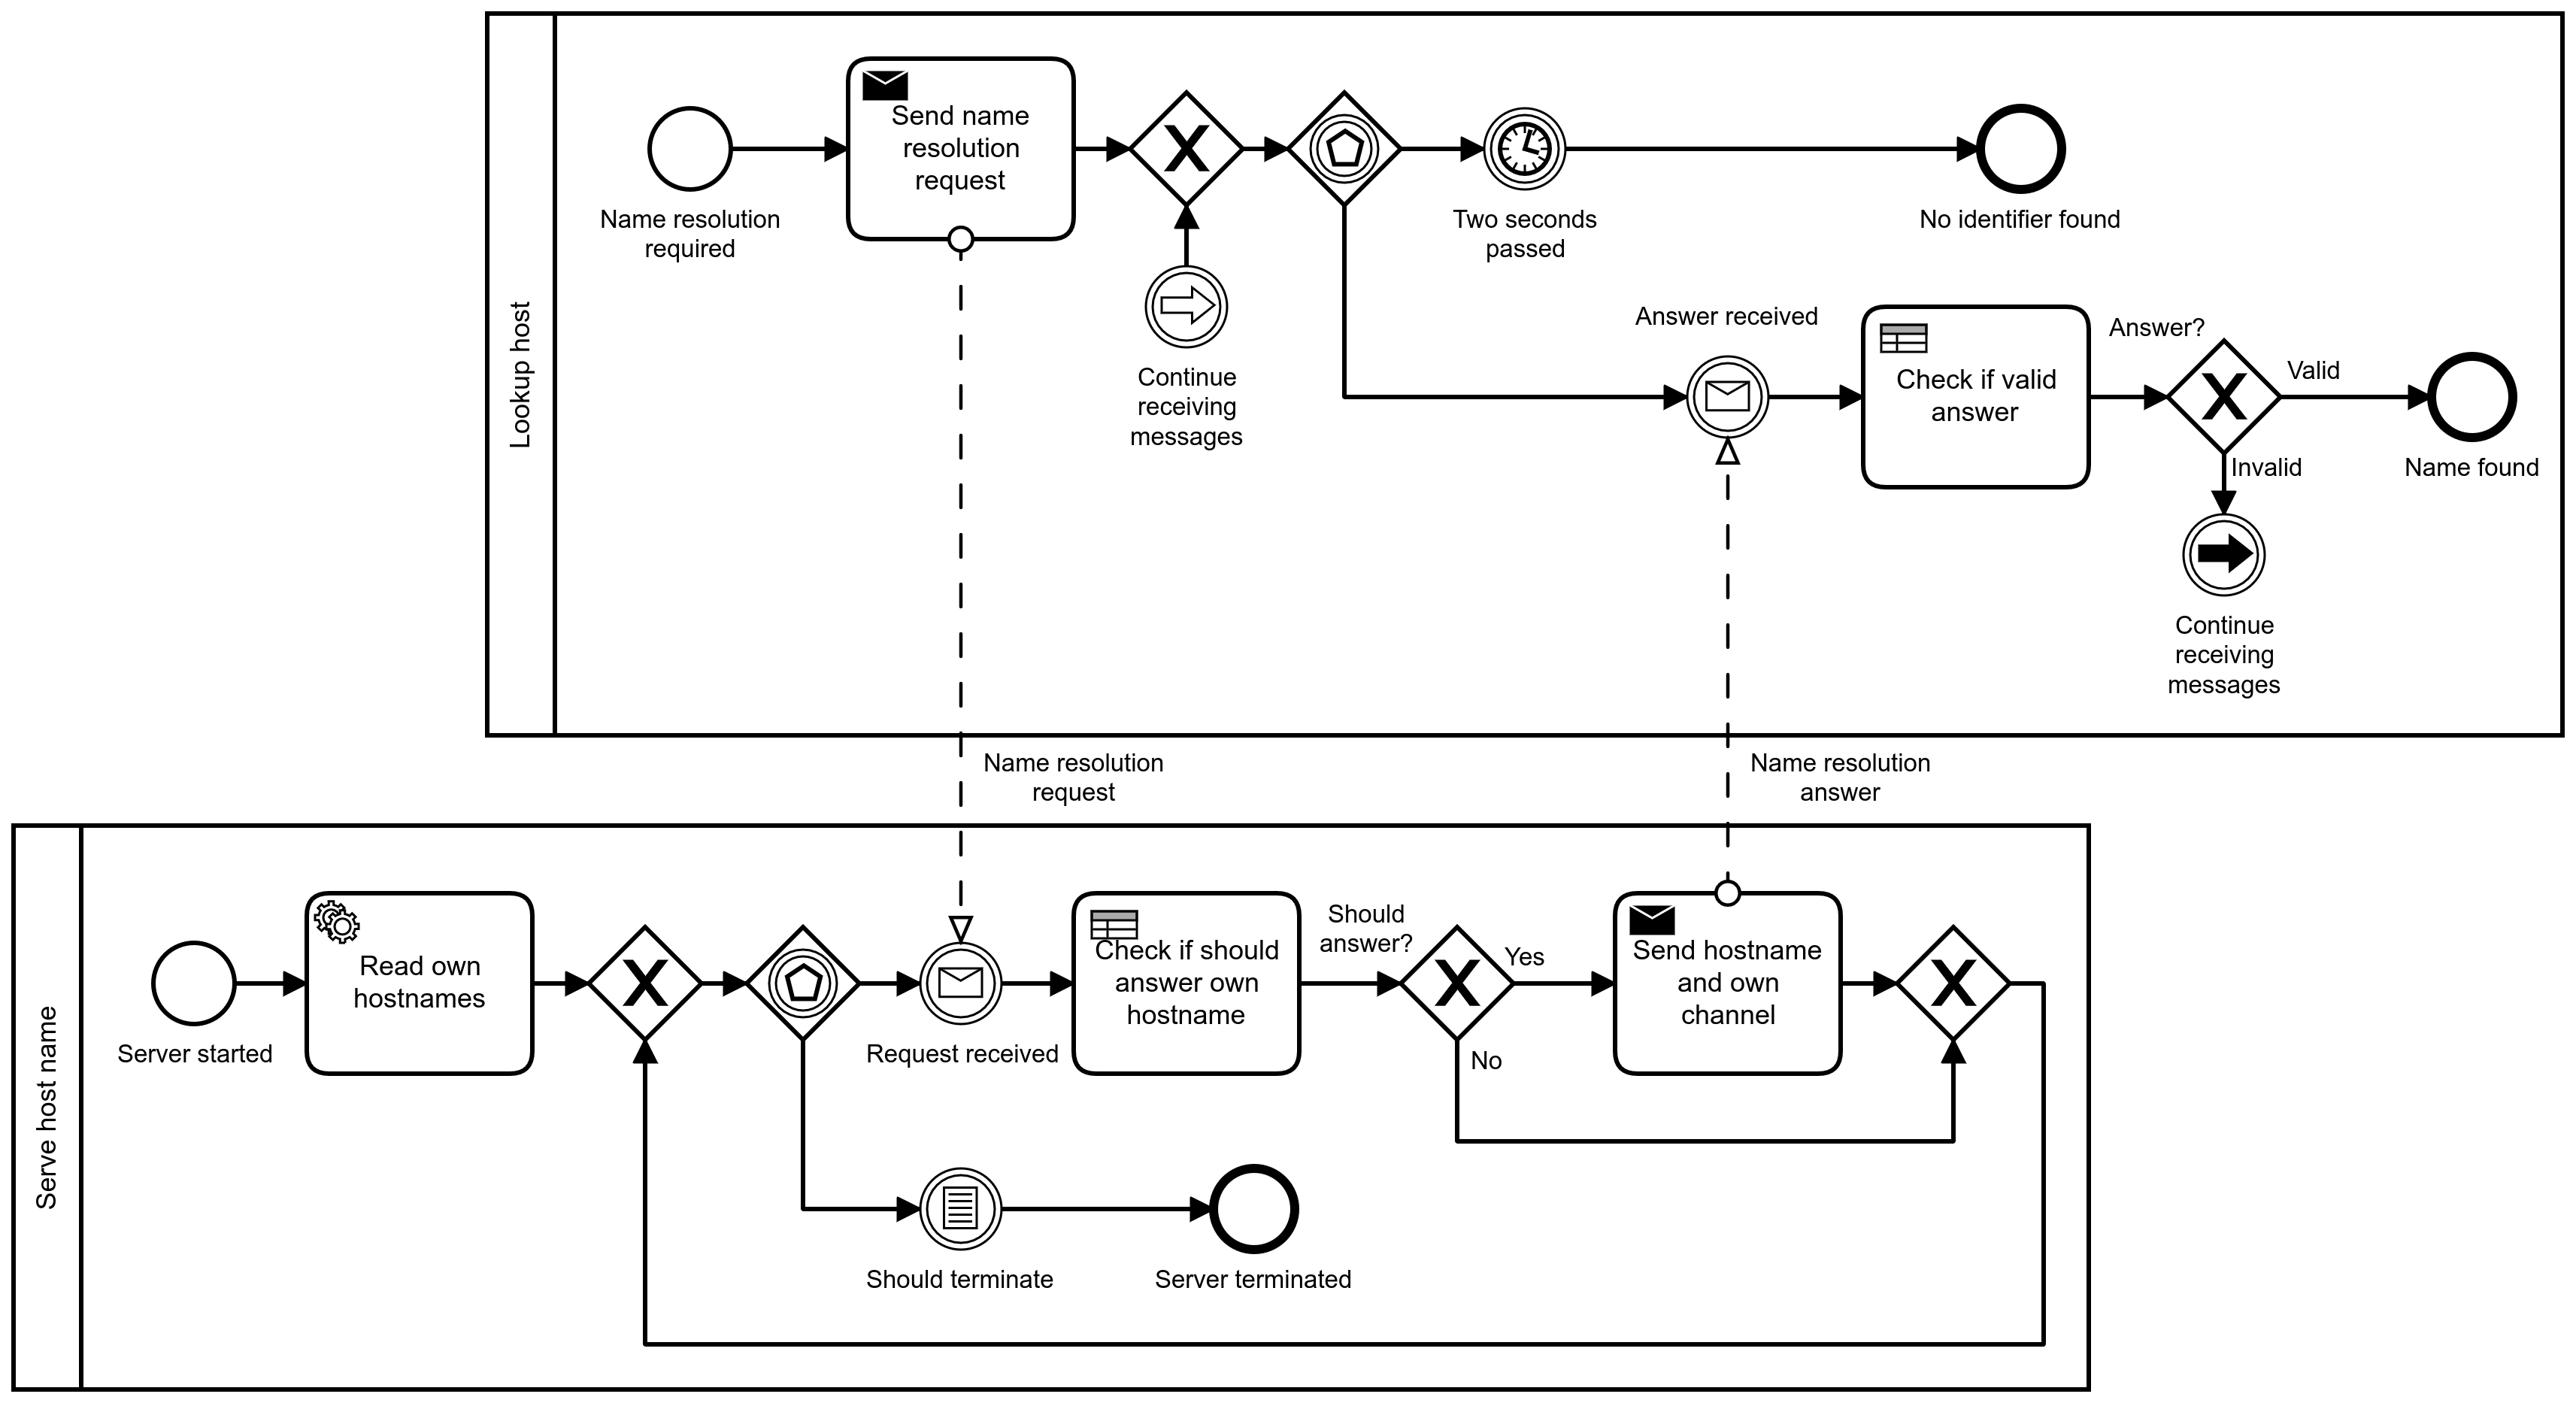 ../../_images/lookup-bpmn.png